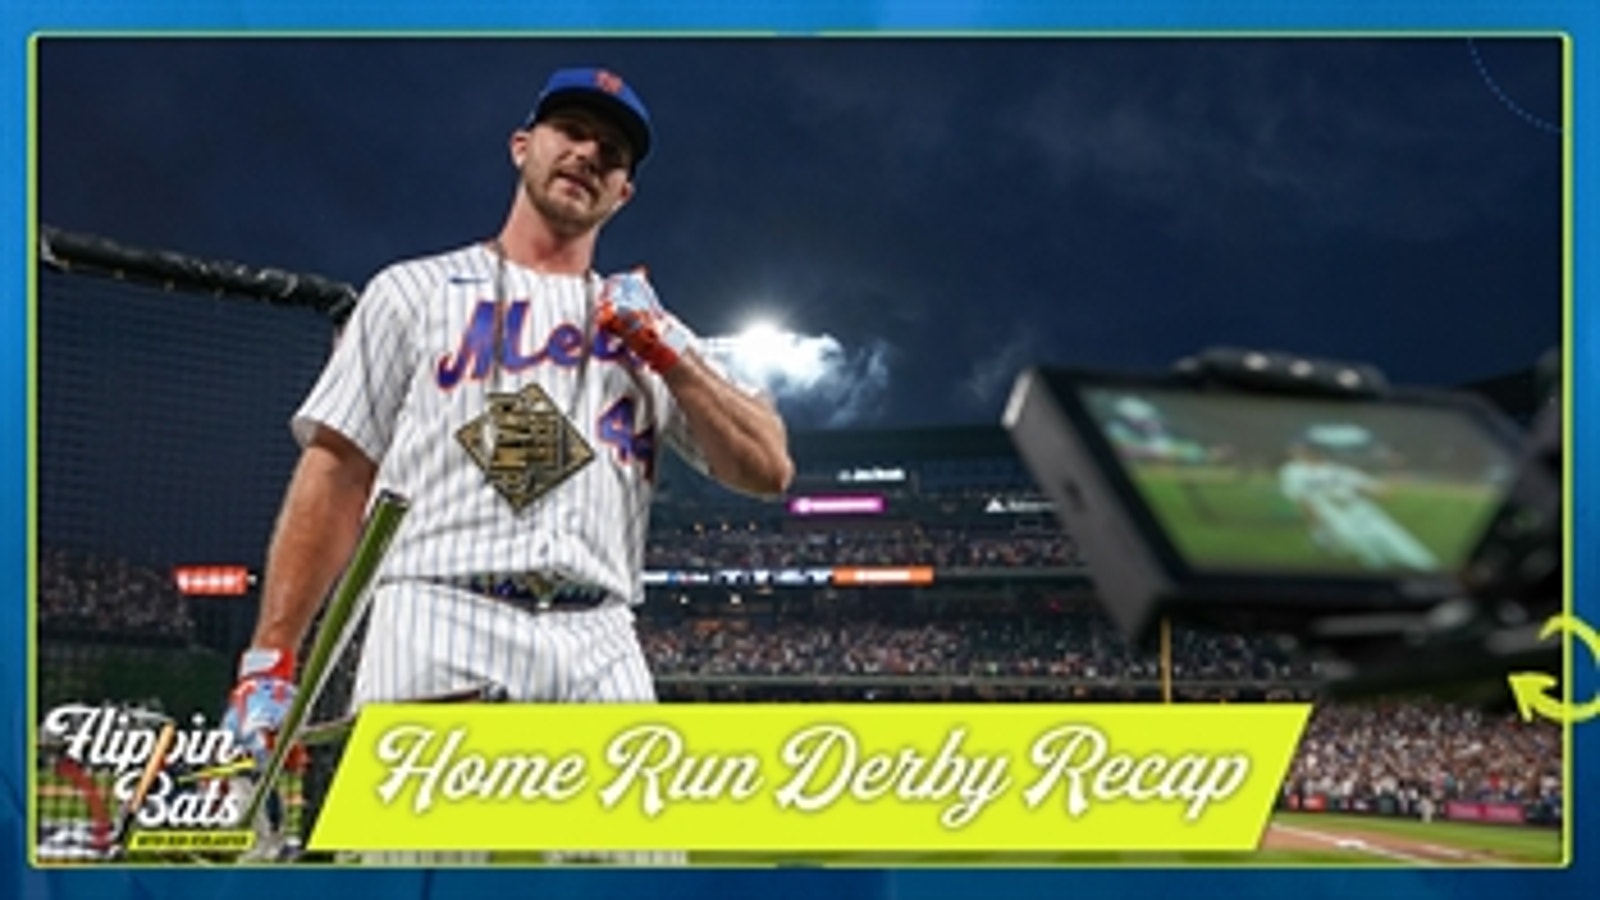 Home Run Derby recap: Pete Alonso repeats in electric performance ' Flippin' Bats